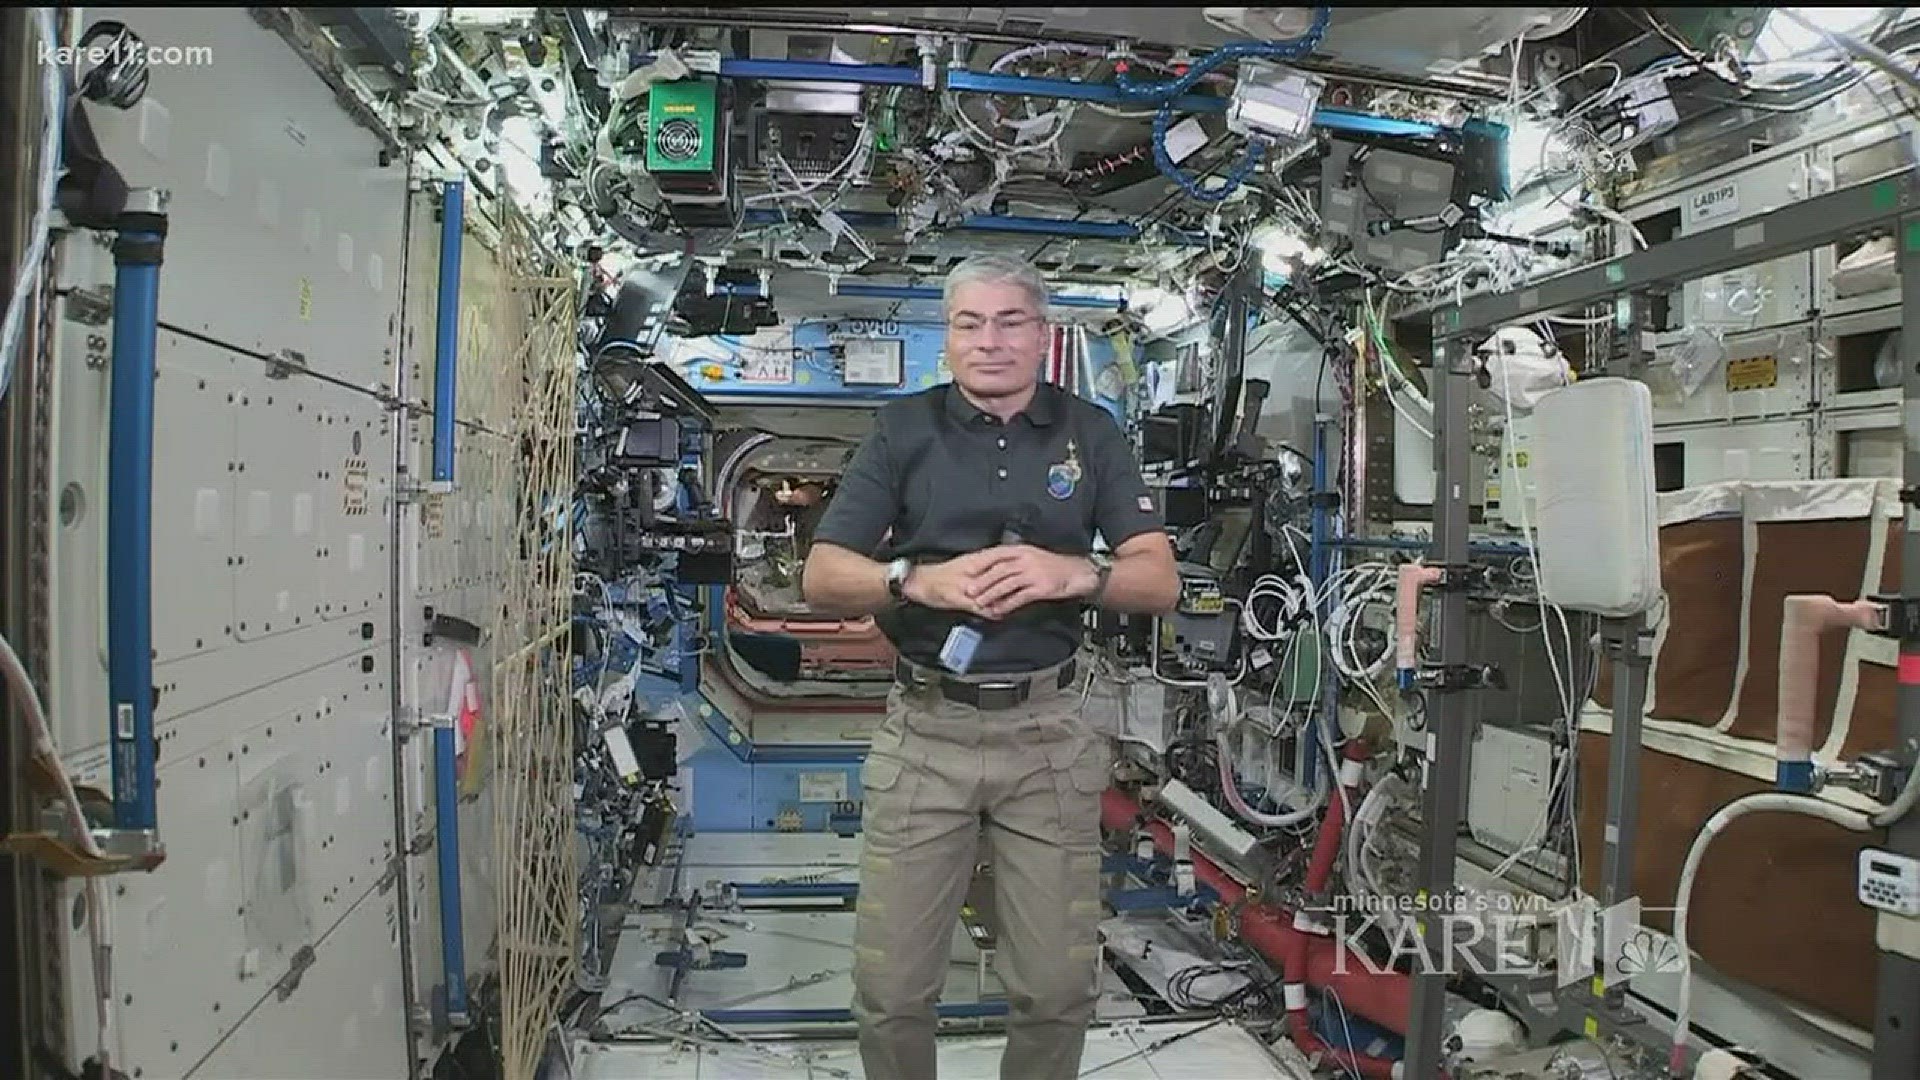 What is a morning in space like? Astronaut Mark Vande Hei talks with the Sunrise team about life on board the International Space Station.